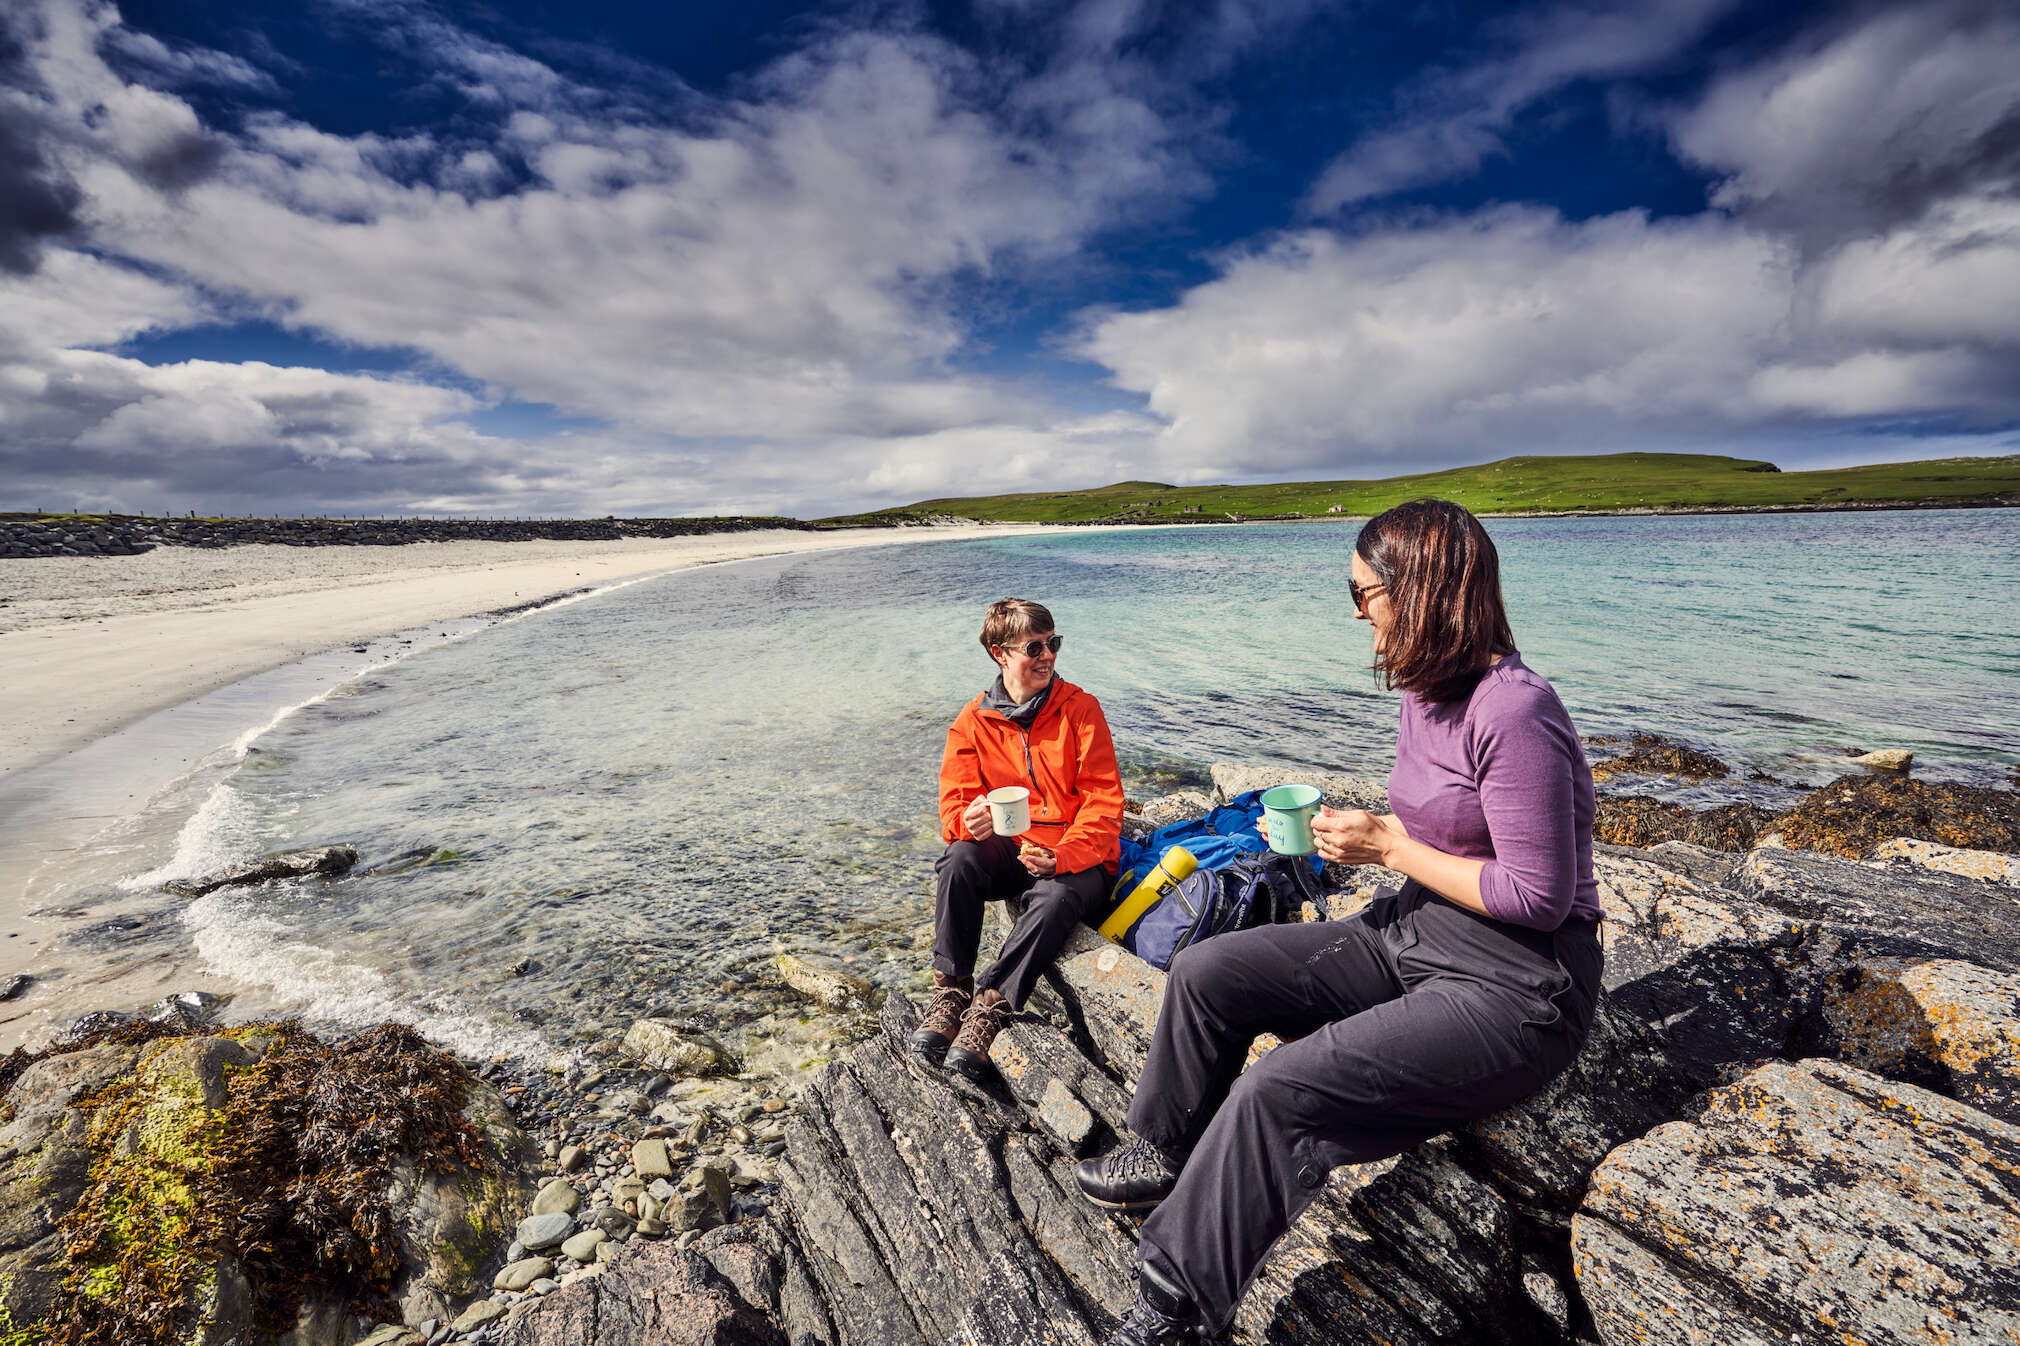 No visit to Shetland is complete without exploring some of the beautiful coves and beaches. Photos: Euan Myles